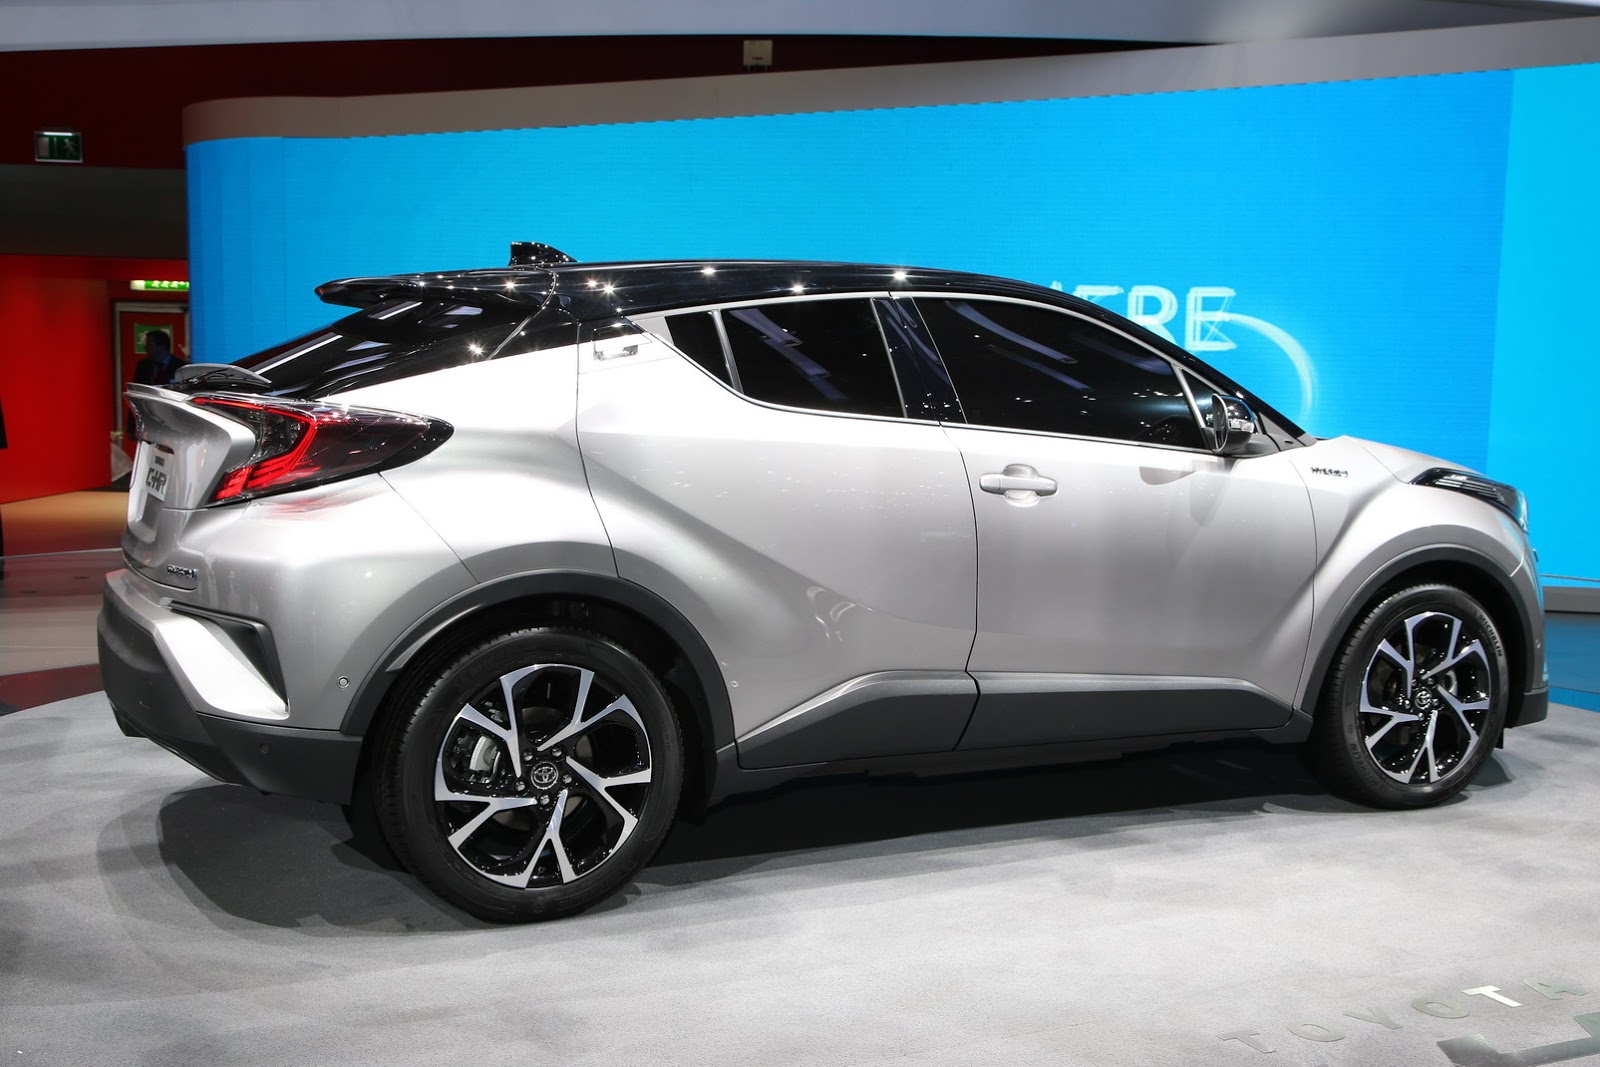 Why Toyota expects to boost C-HR sales by a quarter